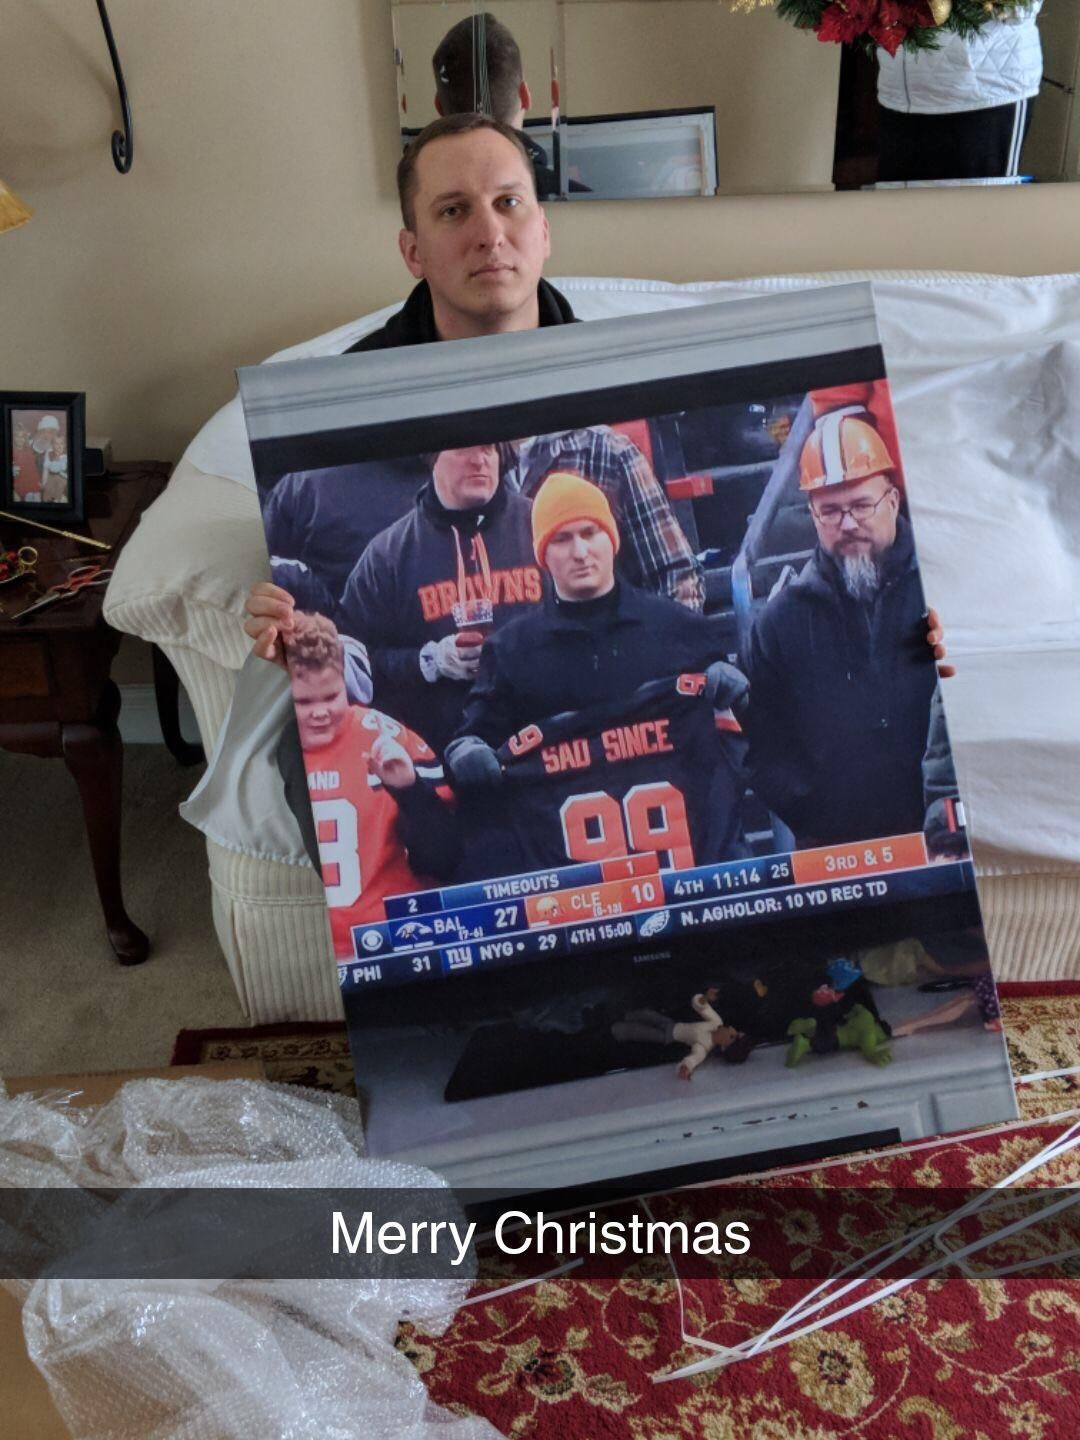 My buddy's brother got a picture of himself for Christmas.